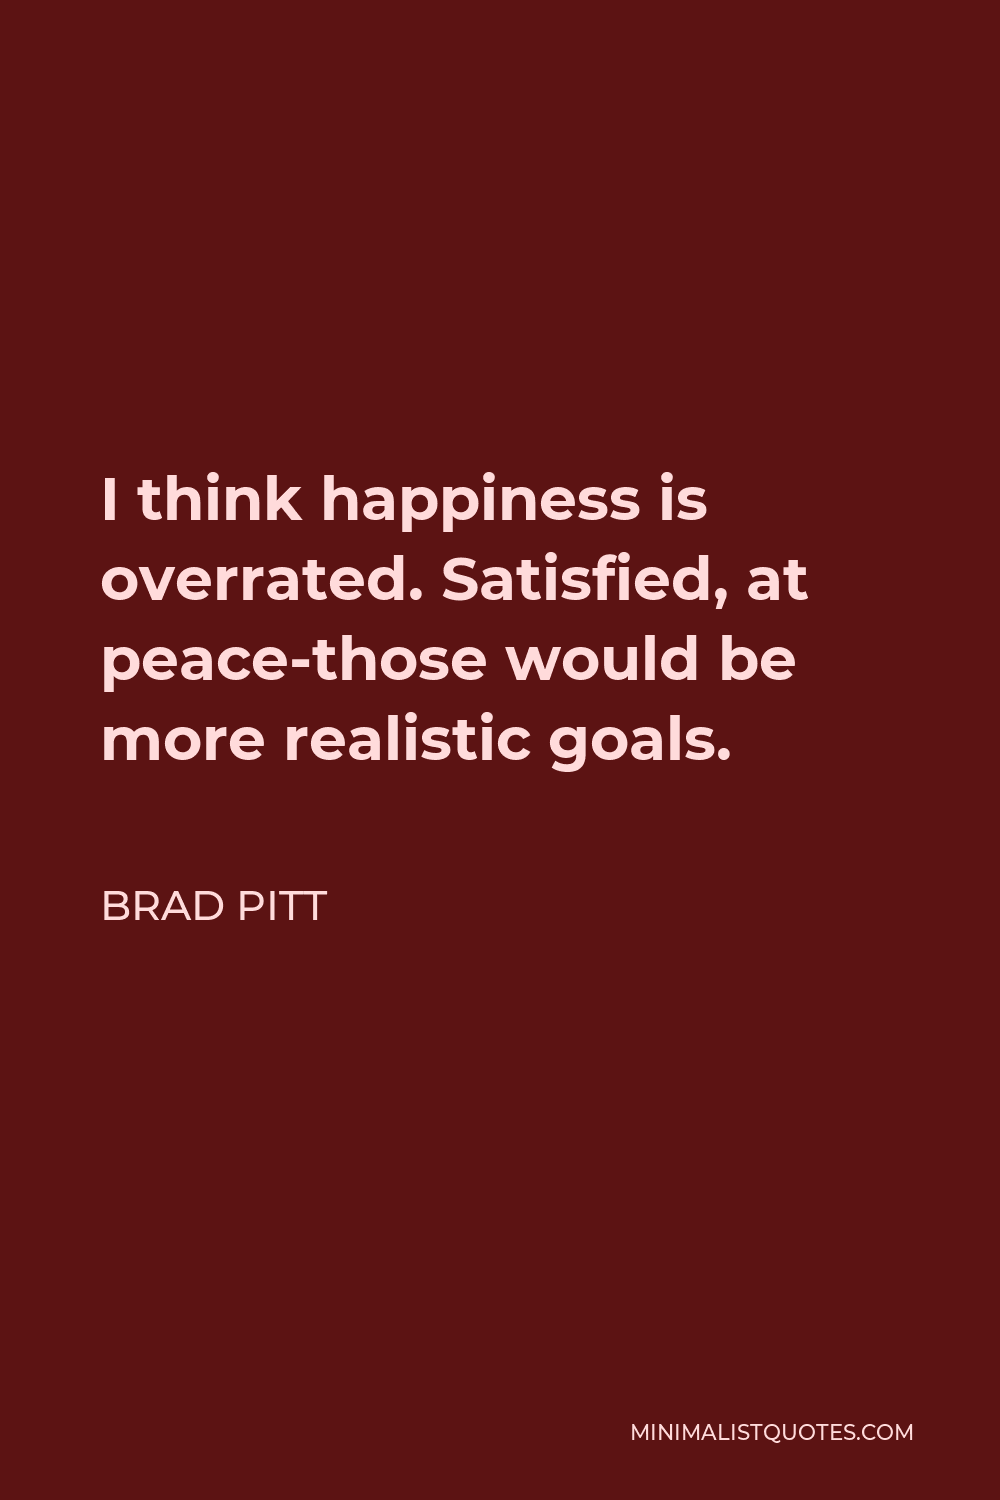 Brad Pitt Quote - I think happiness is overrated. Satisfied, at peace-those would be more realistic goals.